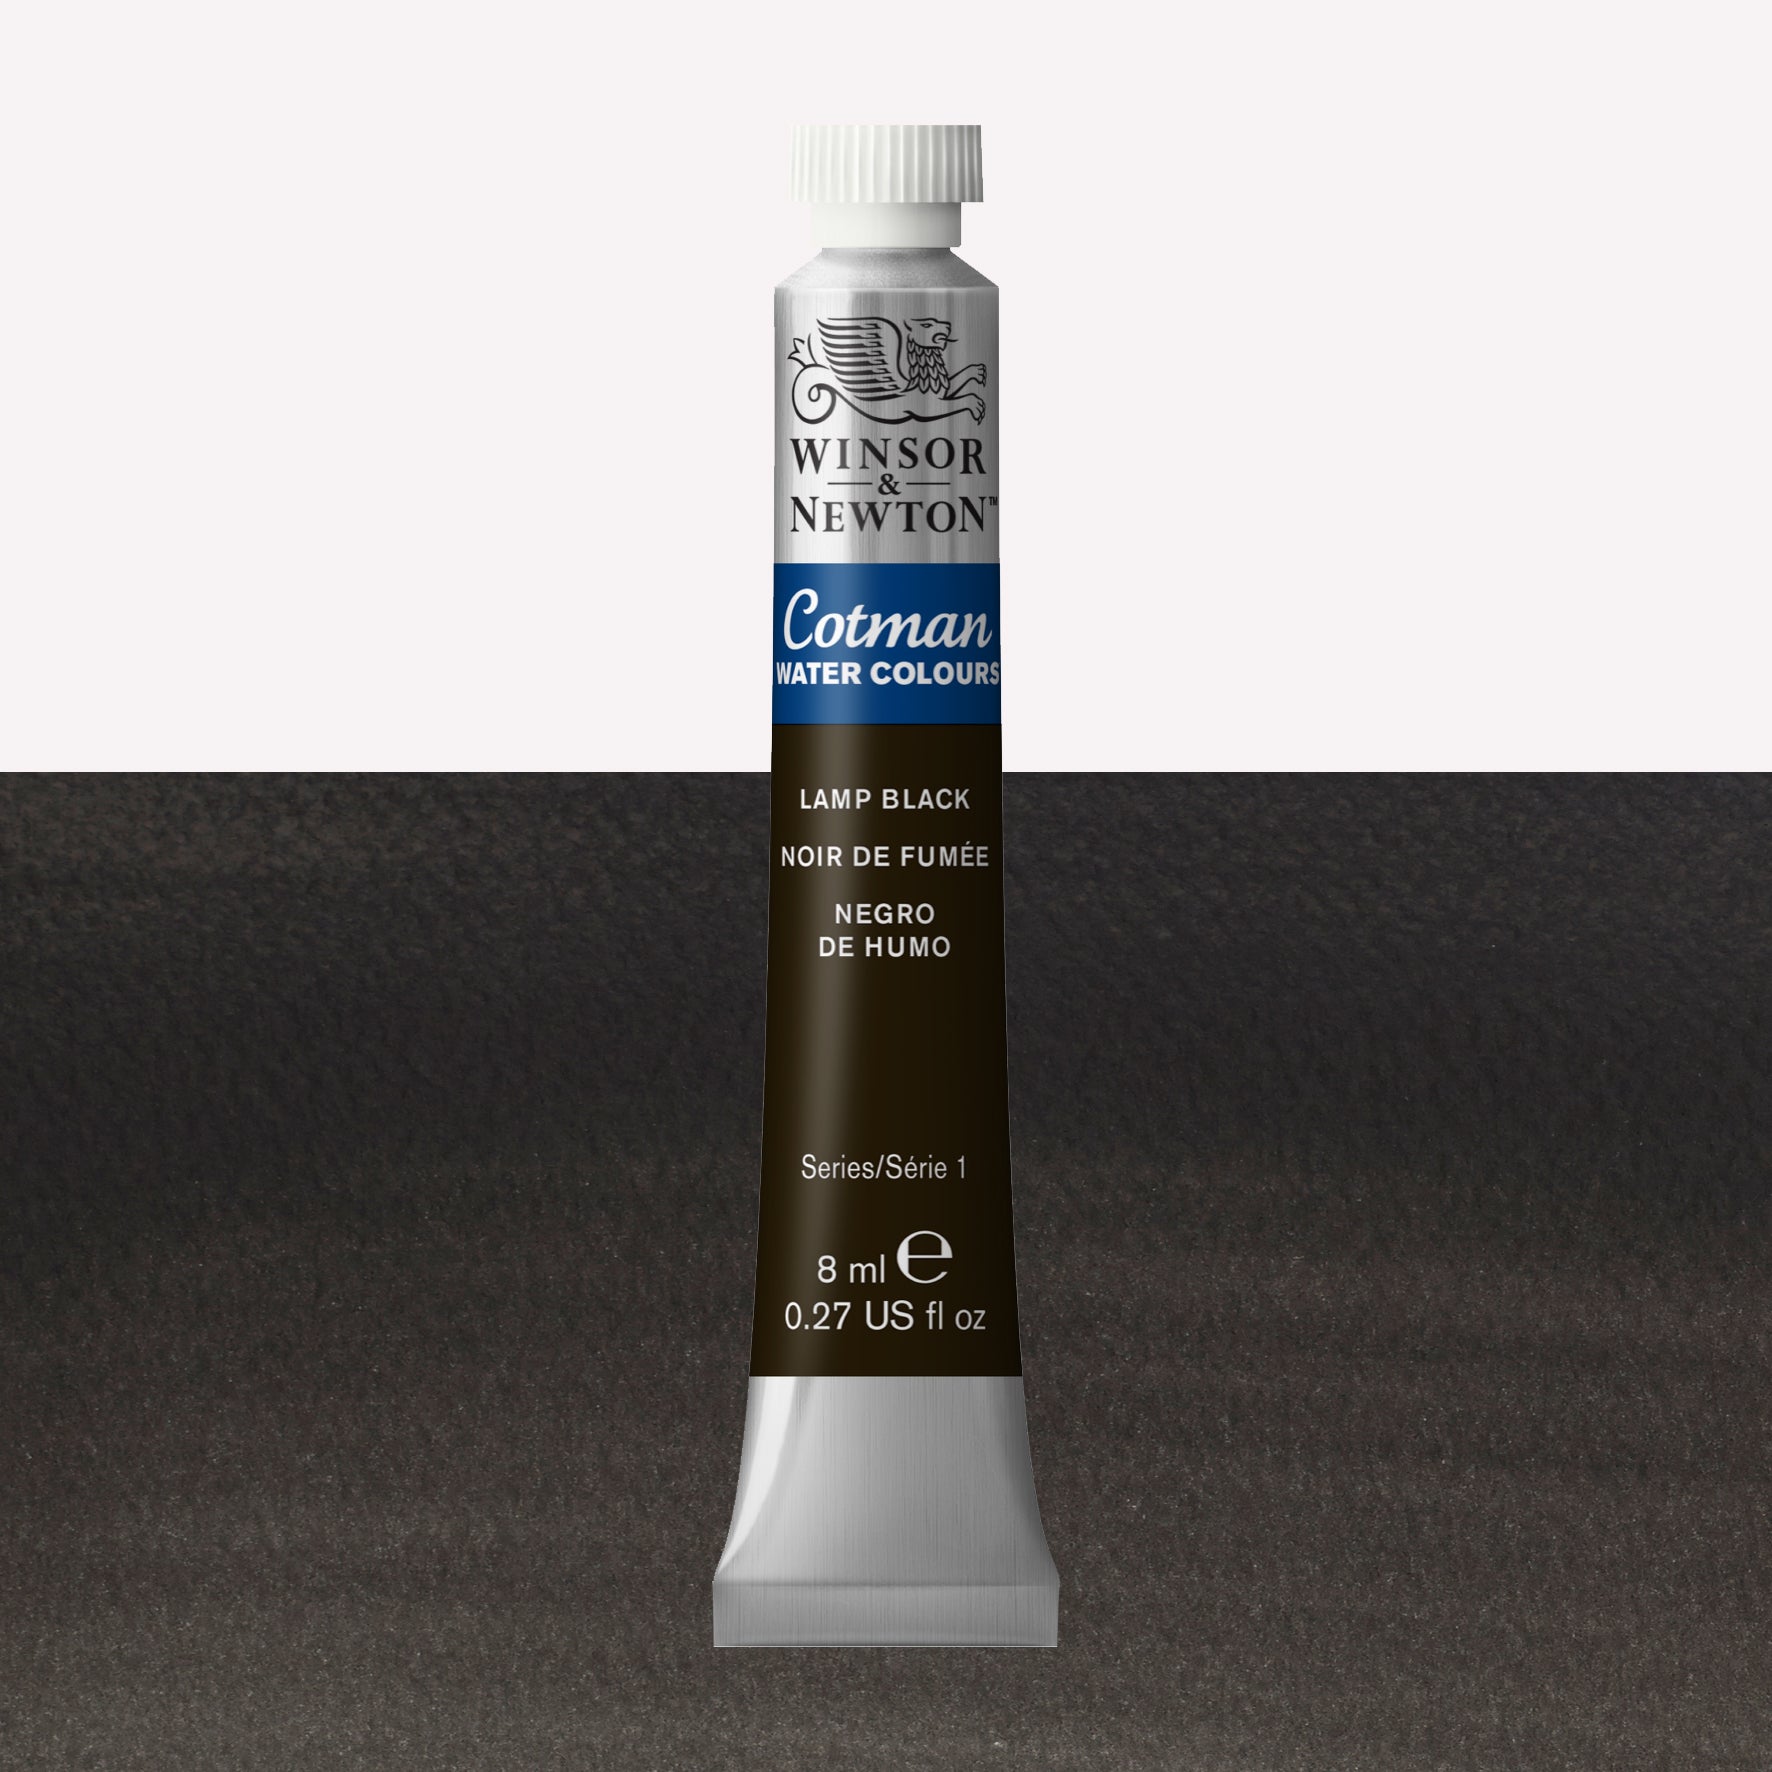 Winsor & Newton Cotman watercolour paint packaged in 8ml silver tube with a white lid in the shade lamp Black over a highly pigmented colour swatch.